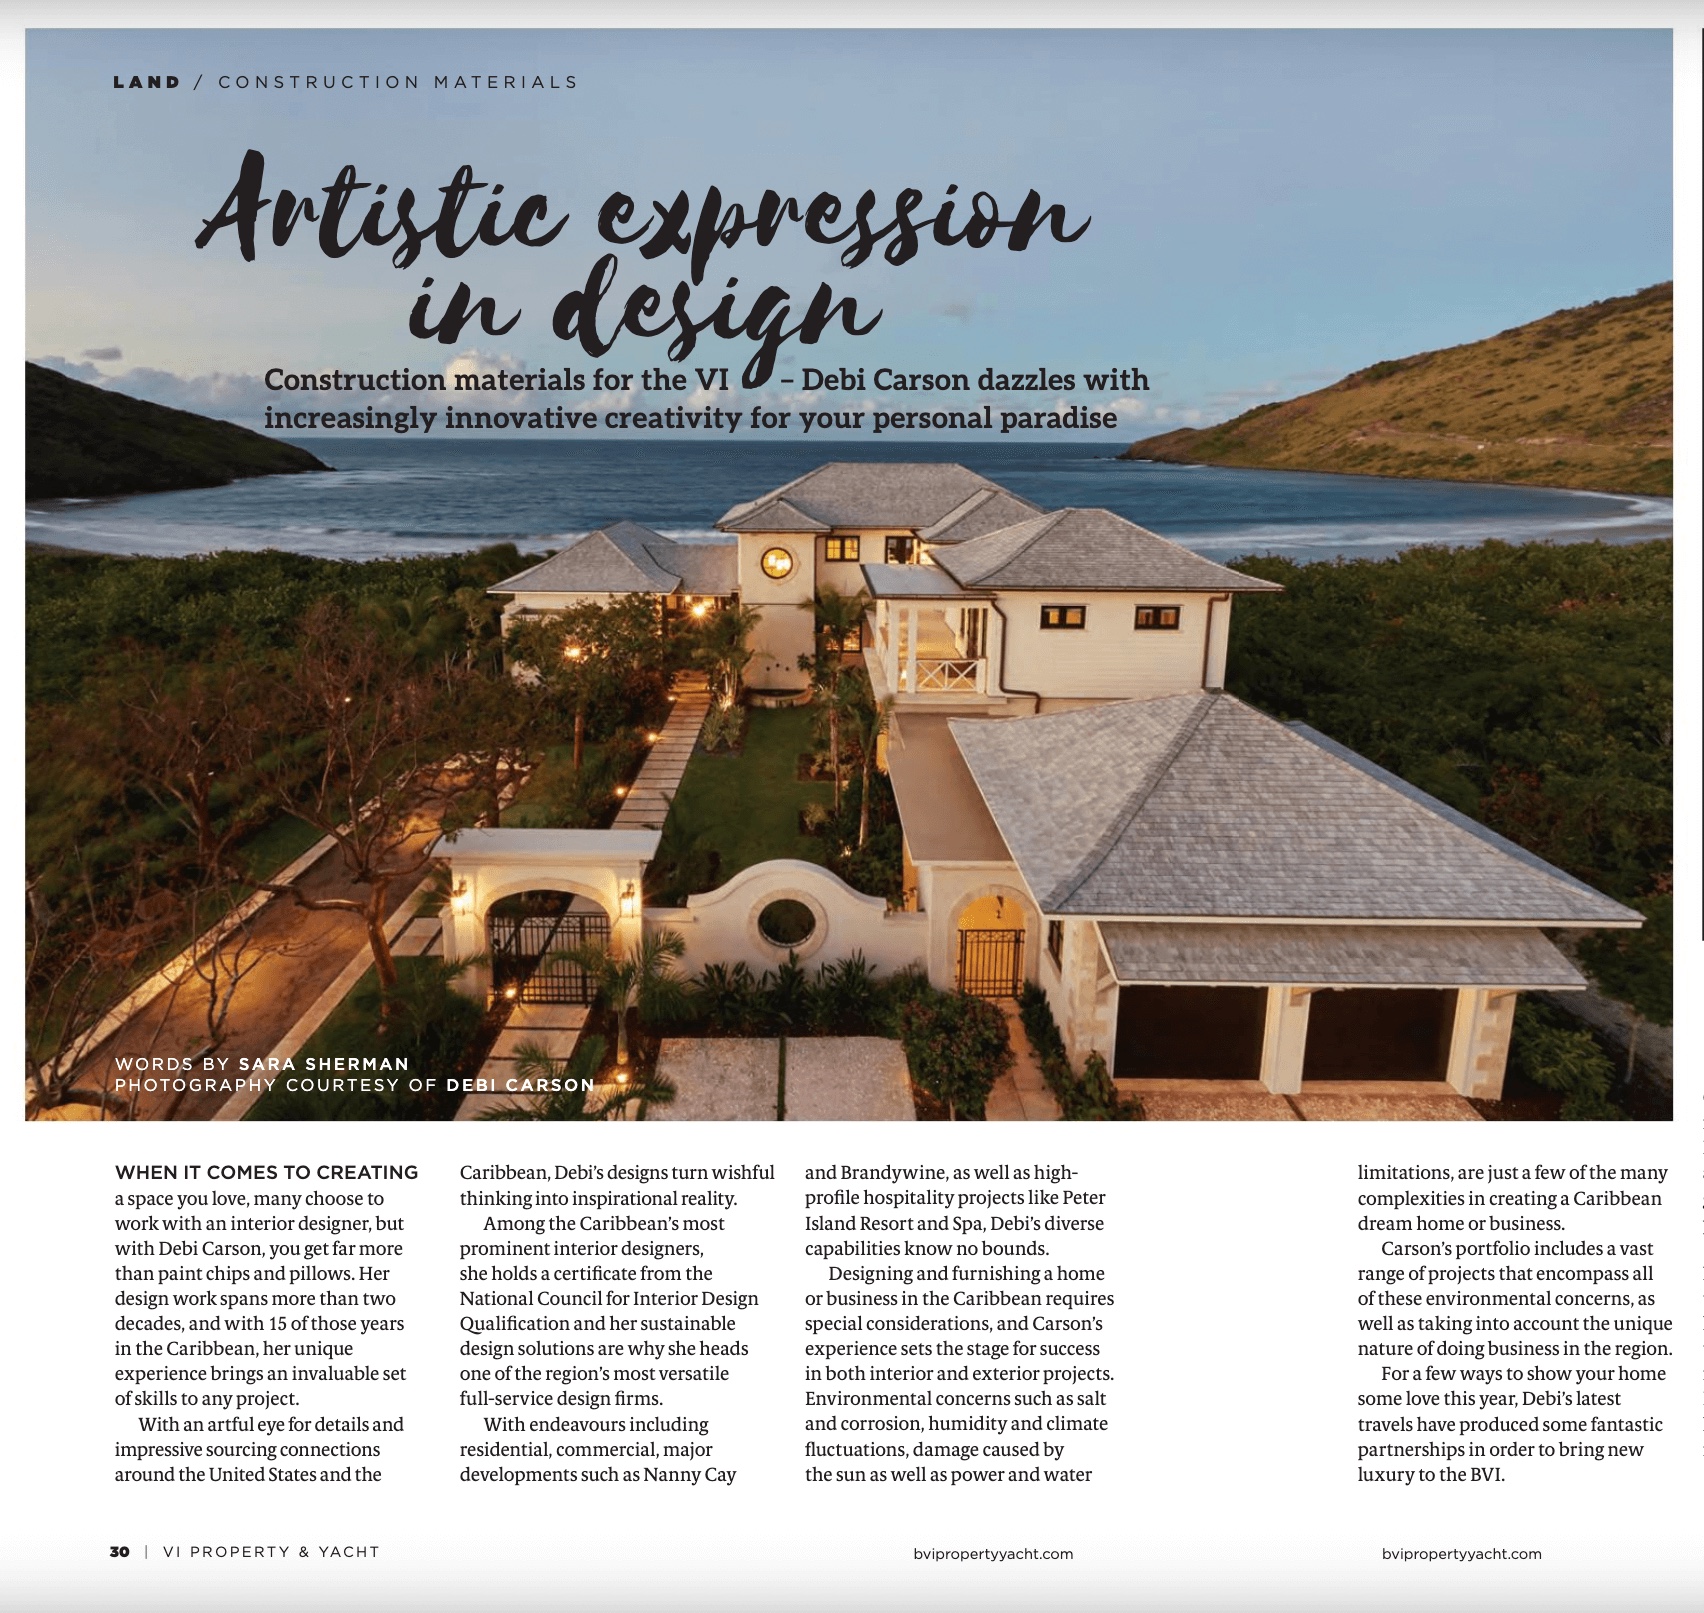 CAOBA FEATURED IN VIRGIN ISLANDS PROPERTY & YACHT